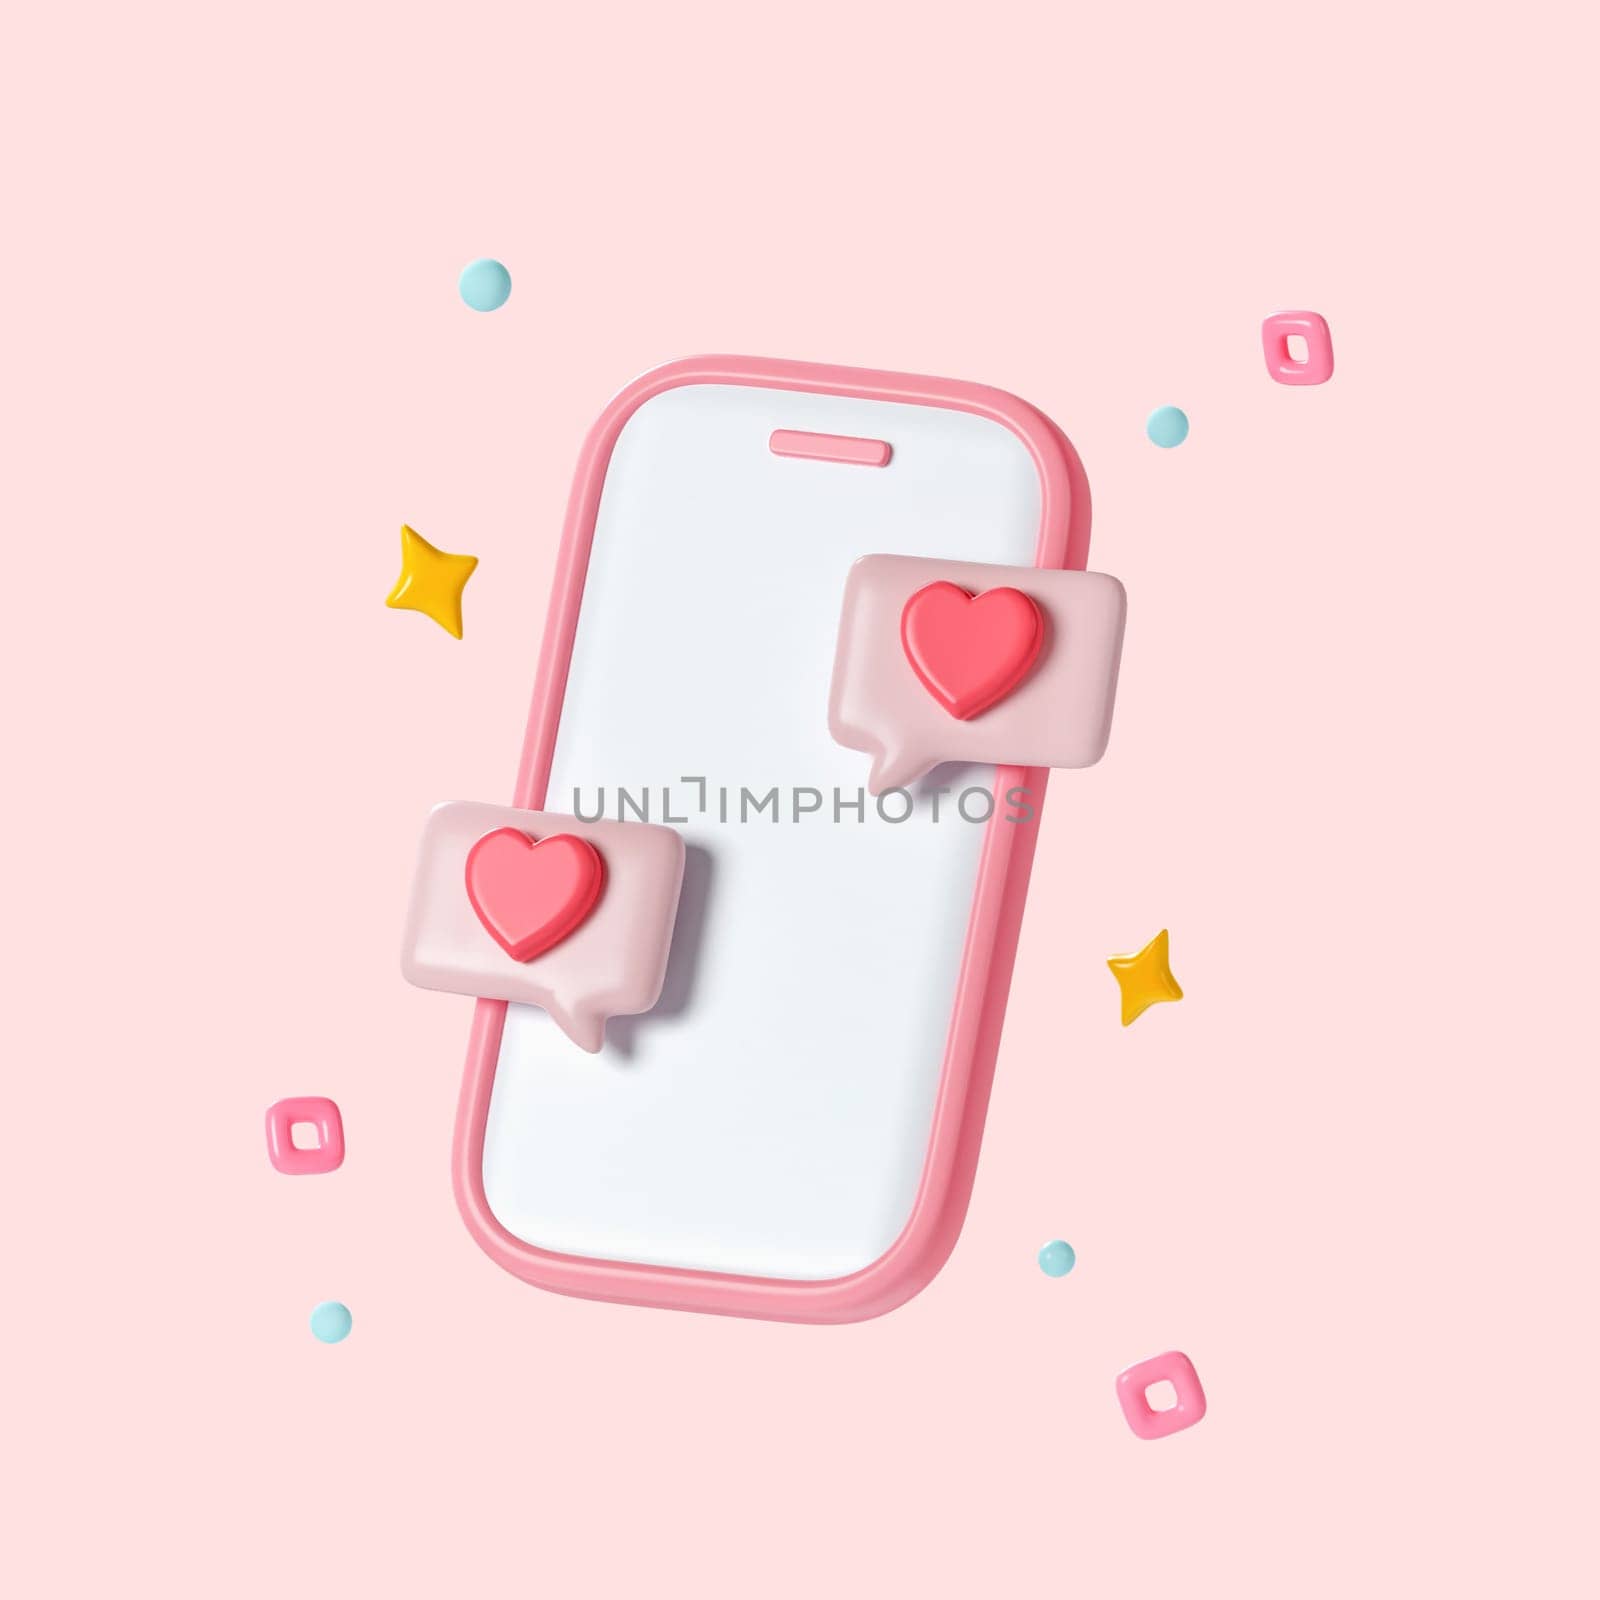 3D pink mobile phone with bubbles and hearts design of love passion romantic valentines day wedding decoration and marriage theme isolated on pink background with clipping path. 3d render illustration by meepiangraphic